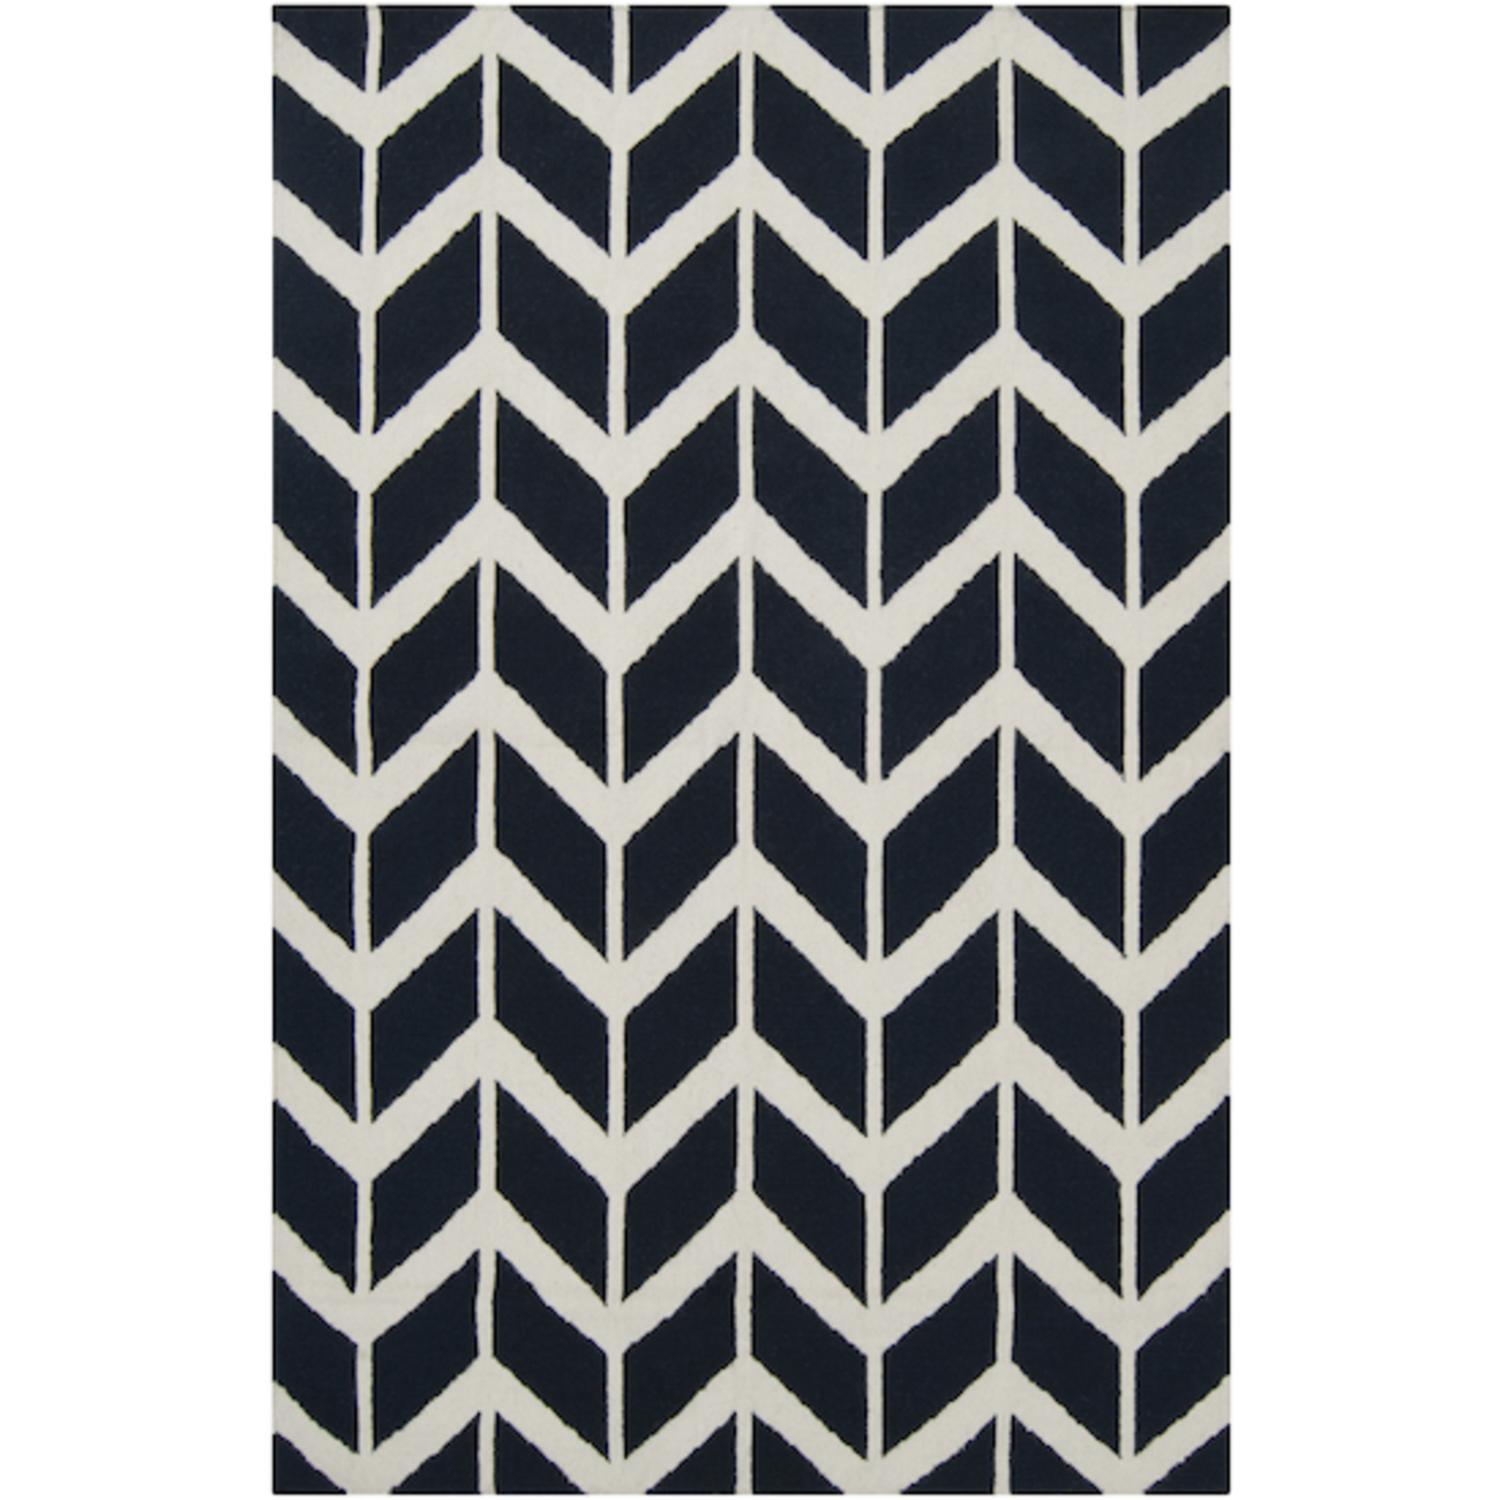 CC Home Furnishings 3.5' x 5.5' Chevron Pathway Federal Blue and Winter White Wool Area Throw Rug